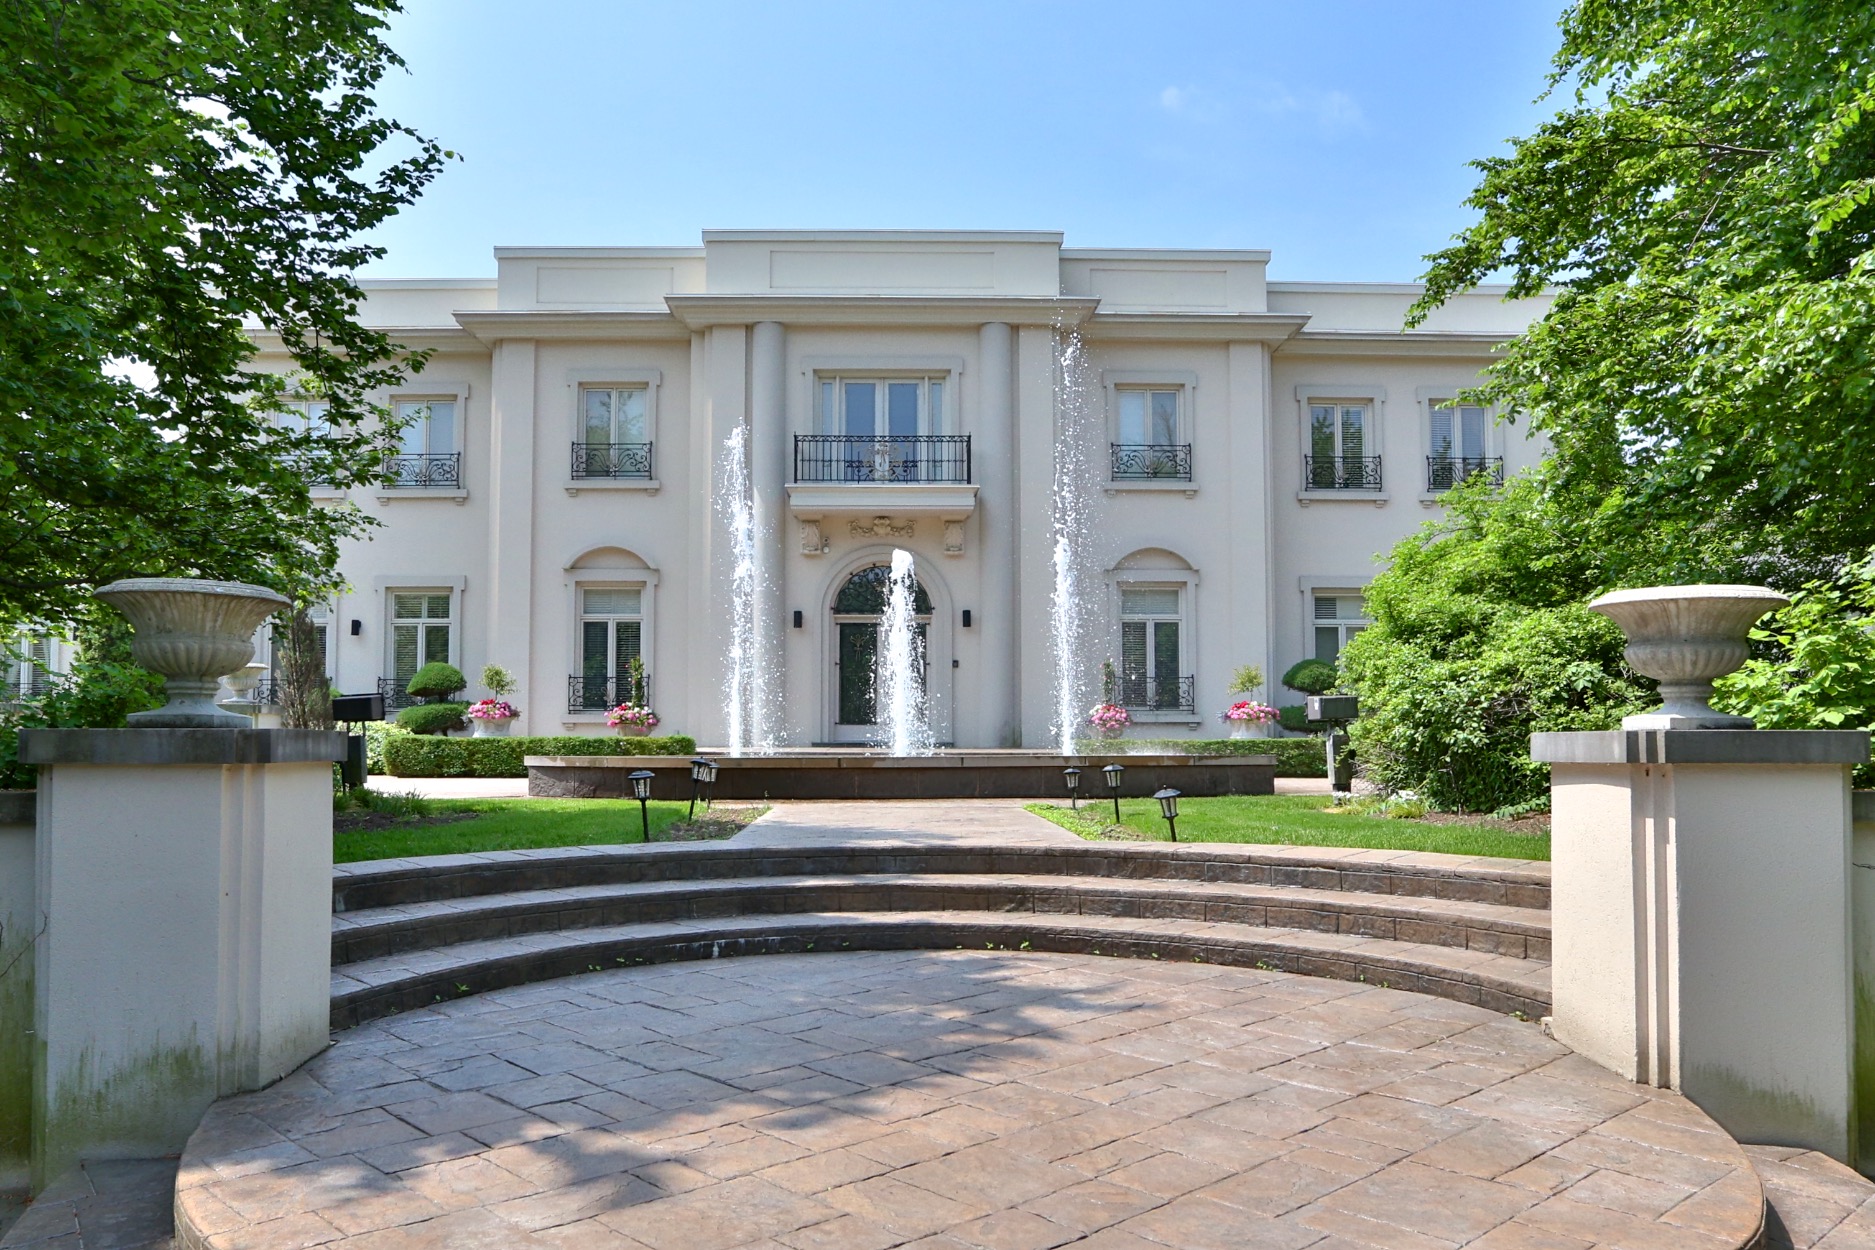 Robert Herjavec's Bridle Path Mansion that he shared with ex-wife